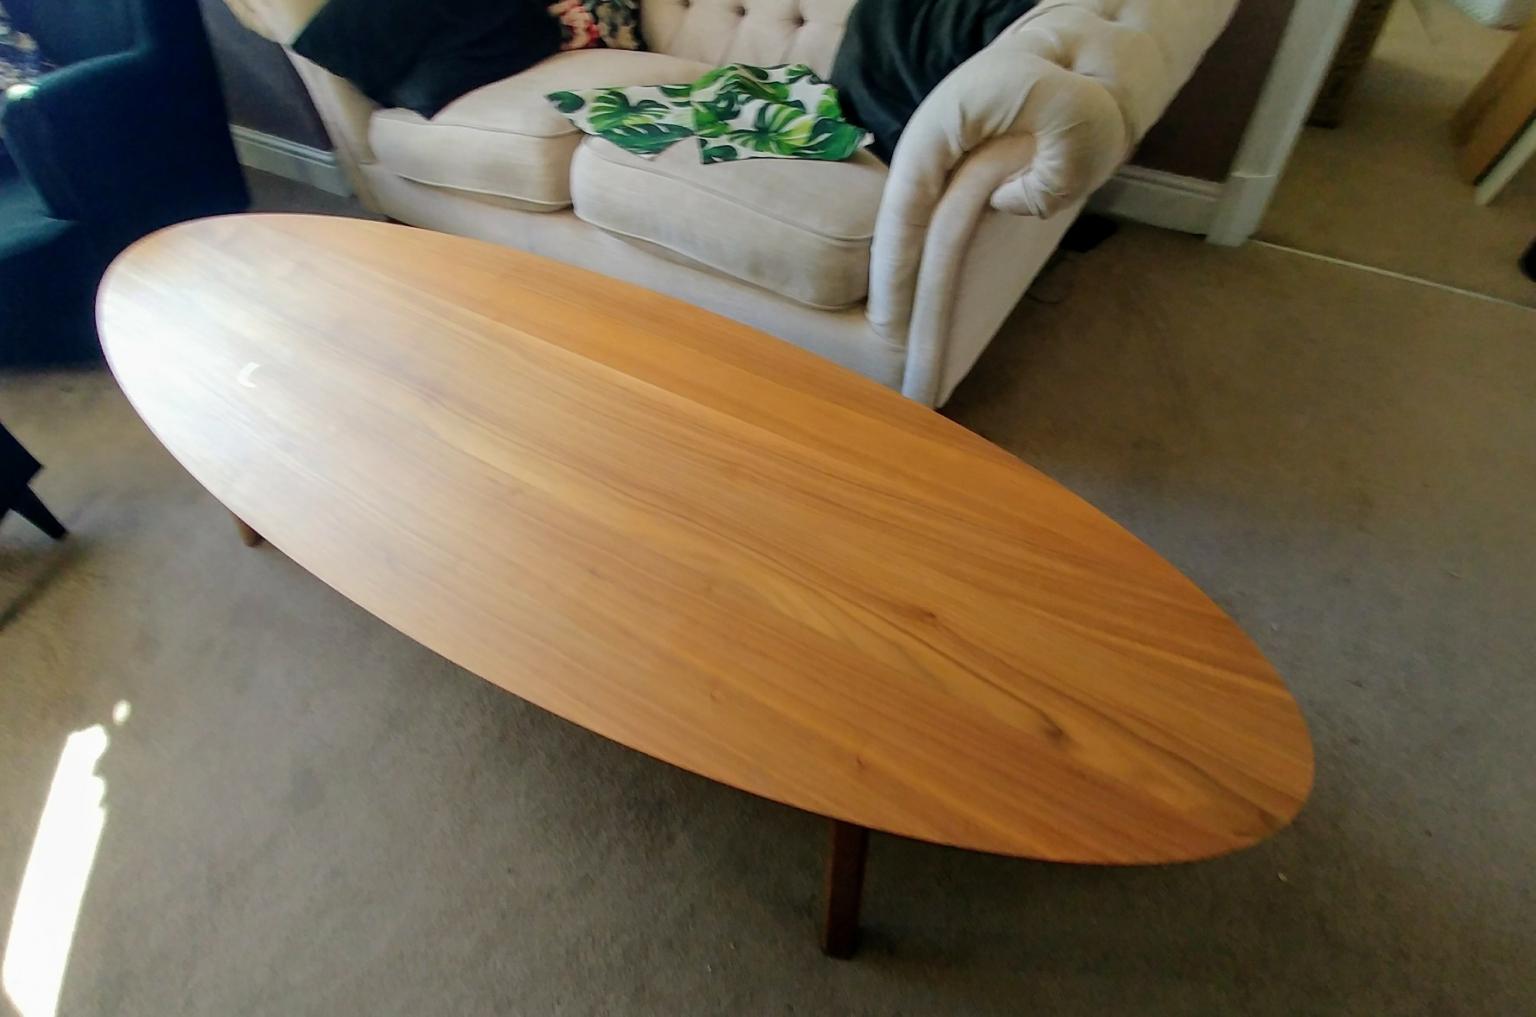 IKEA STOCKHOLM coffee table in Stockport for £140.00 for sale | Shpock